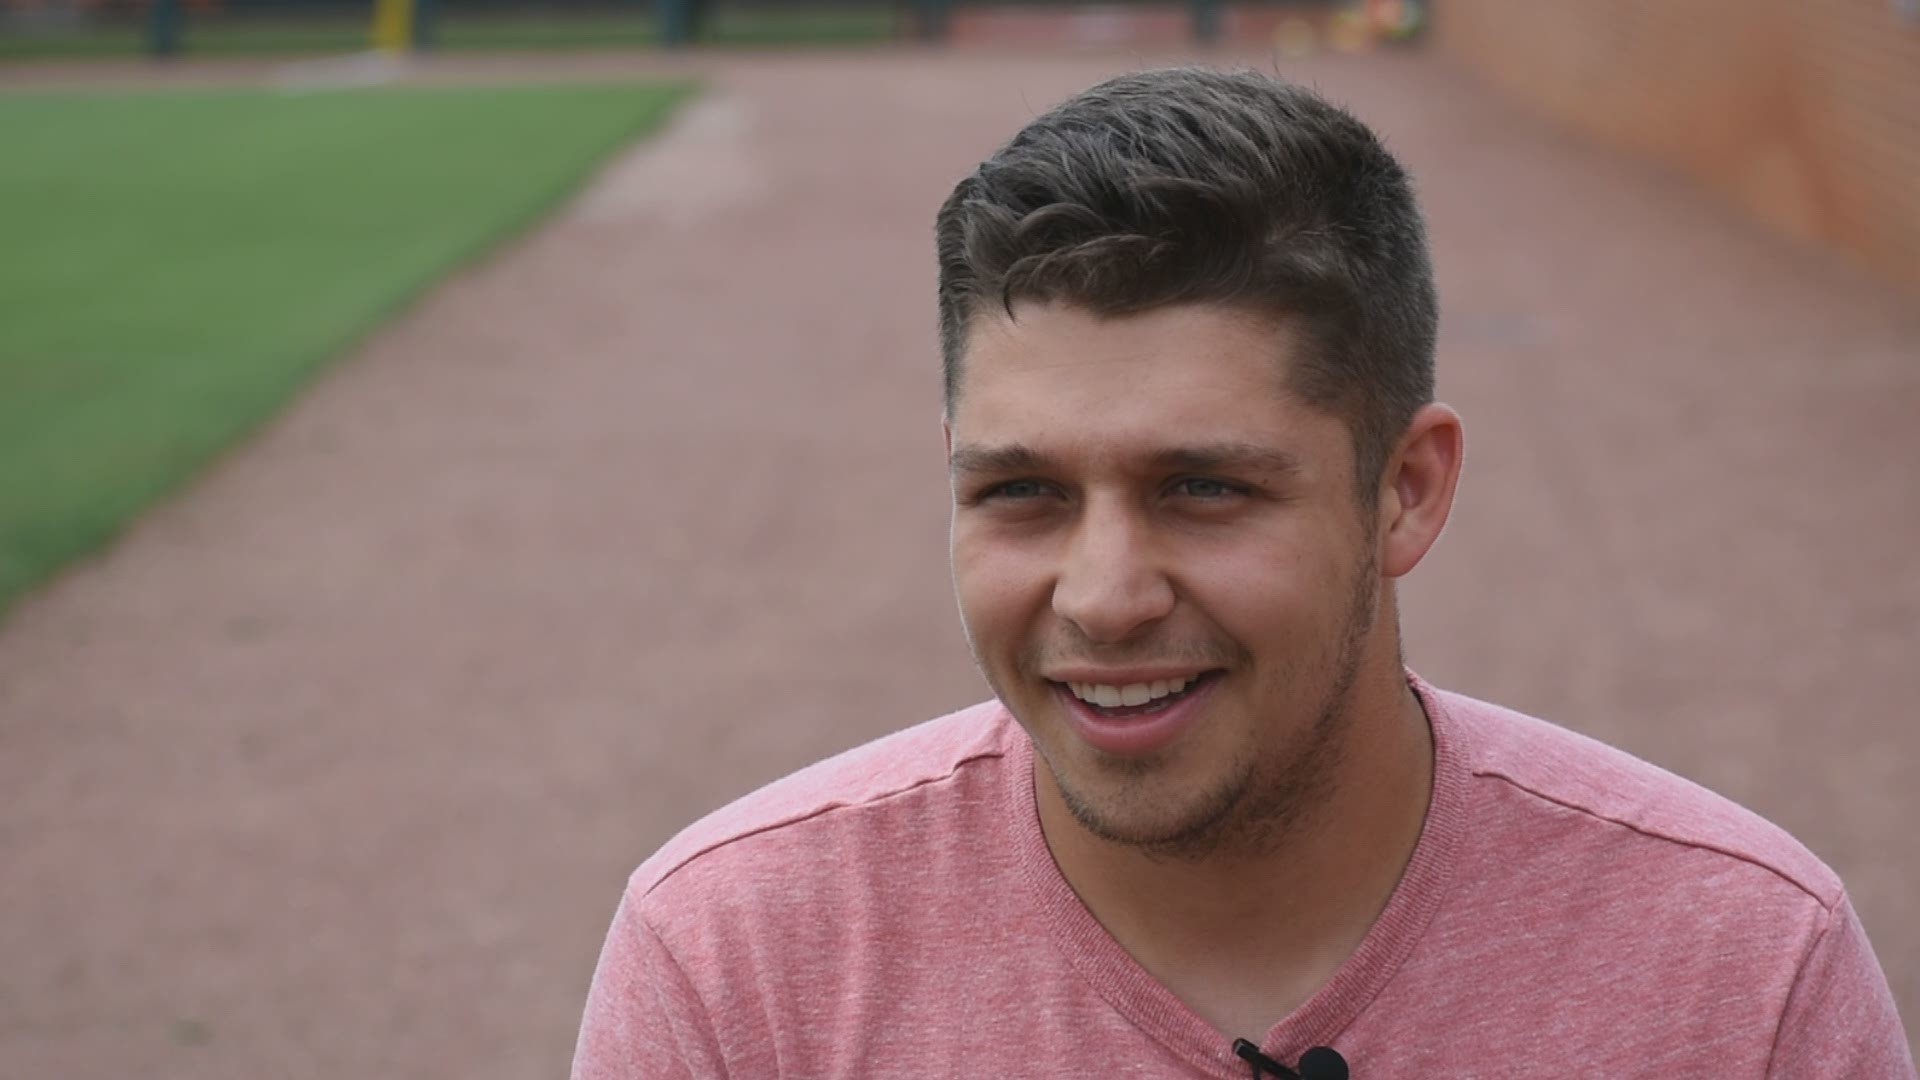 Vols catcher Nico Mascia has a 3.99 GPA as a chemical and biomolecular engineering major. In this video he talks about the missing point in his GPA, his challenging major, his favorite study spot, future career possibilities, shadowing doctors and doing b